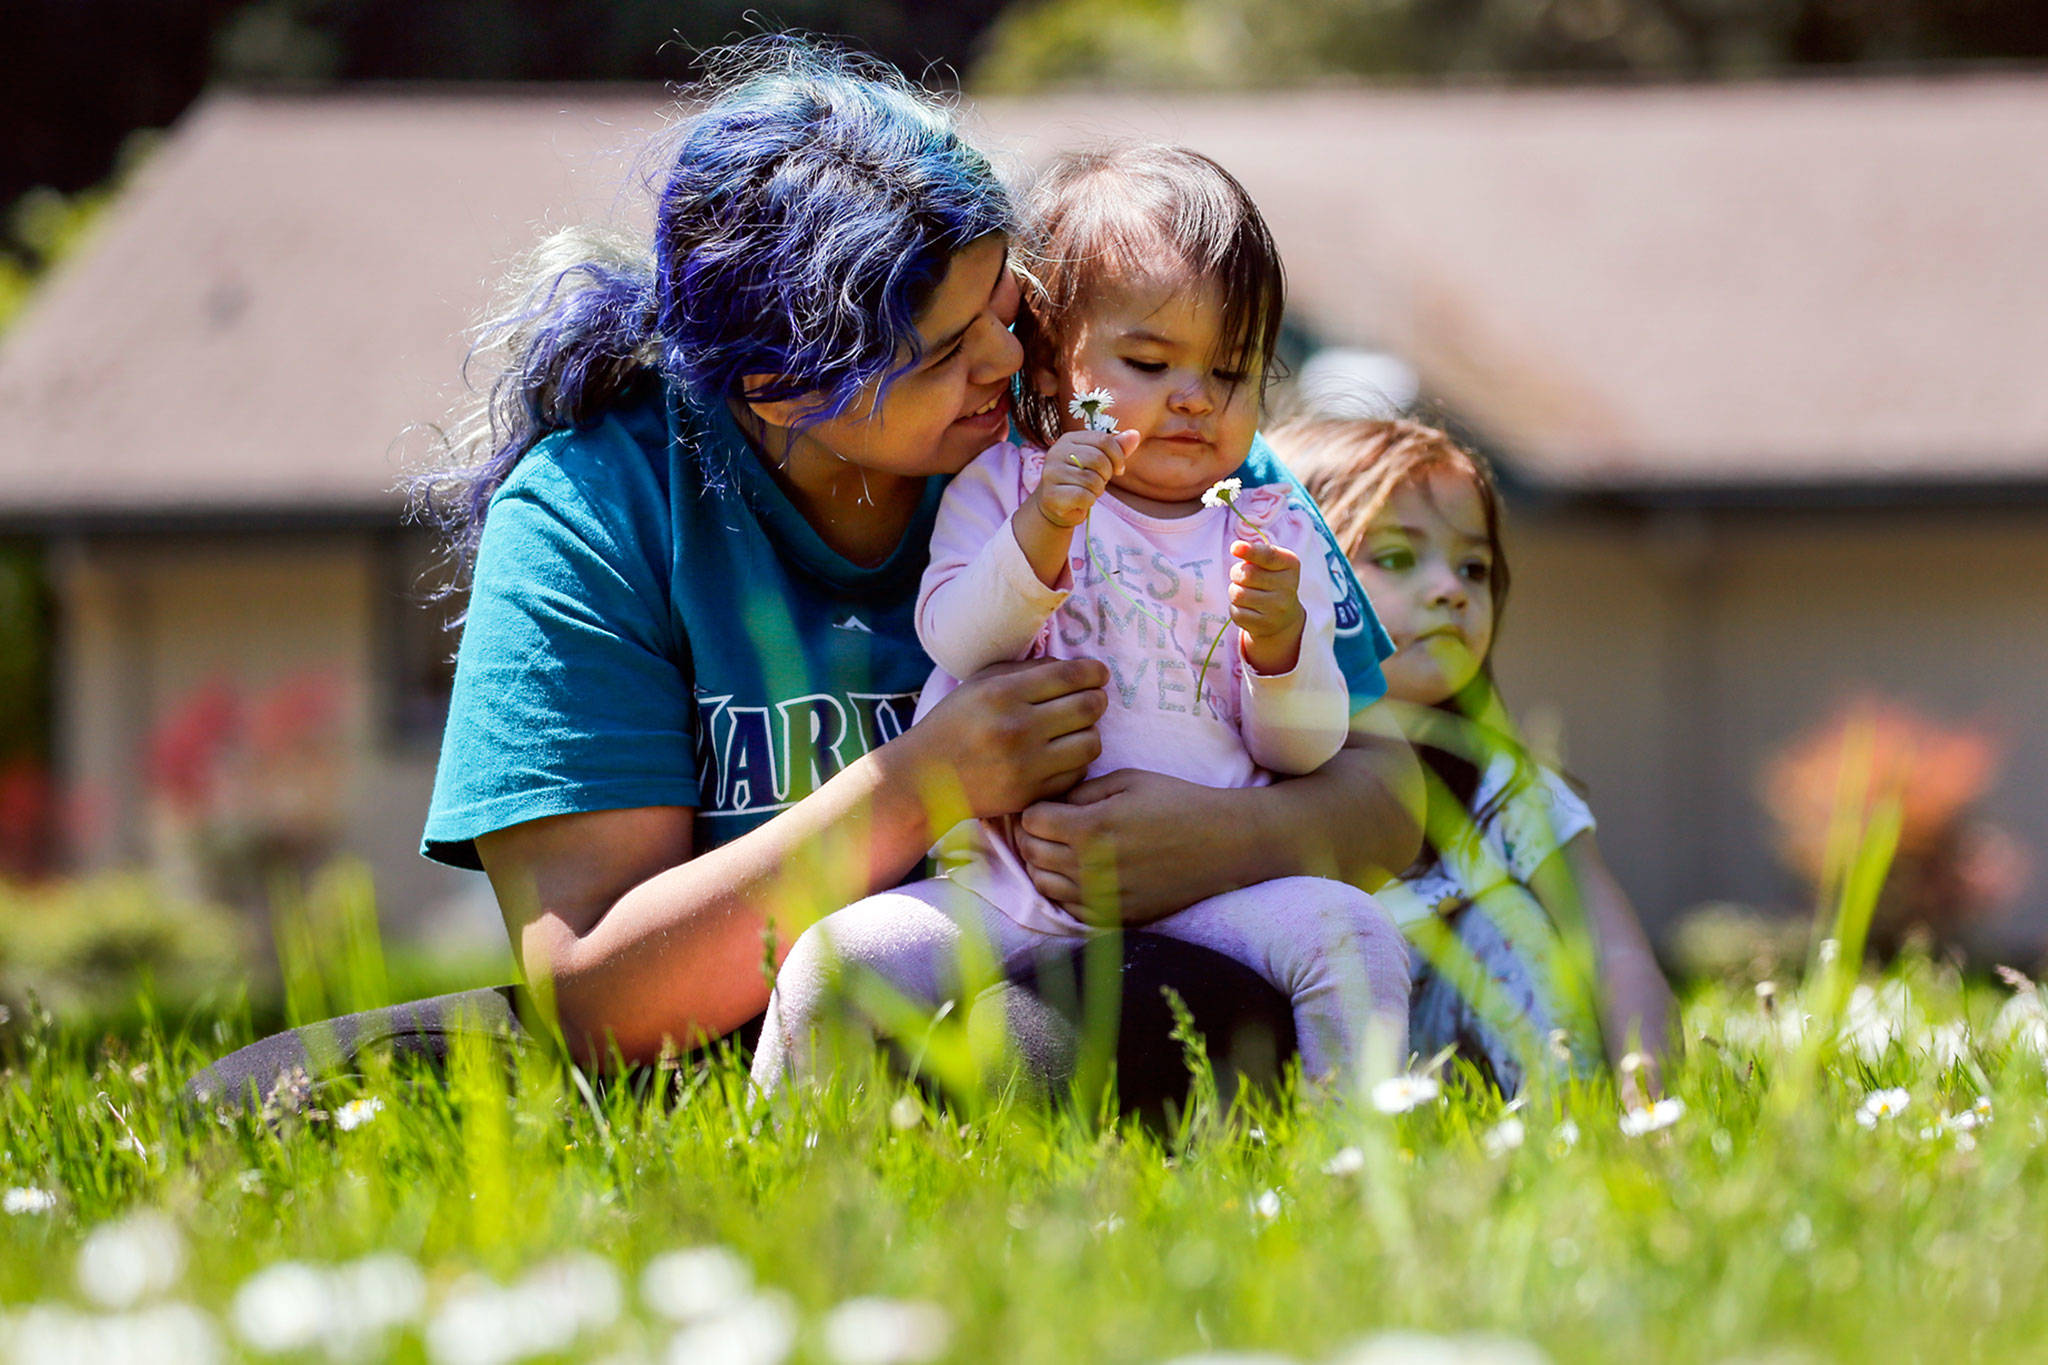 Lavennah Shongutsie hugs daughter Moniqueah Shongutsie-Wesley in the afternoon sun at Forest Park in Everett on Thursday. Temperatures are expected to reach 80 degrees this weekend. (Kevin Clark / The Herald)